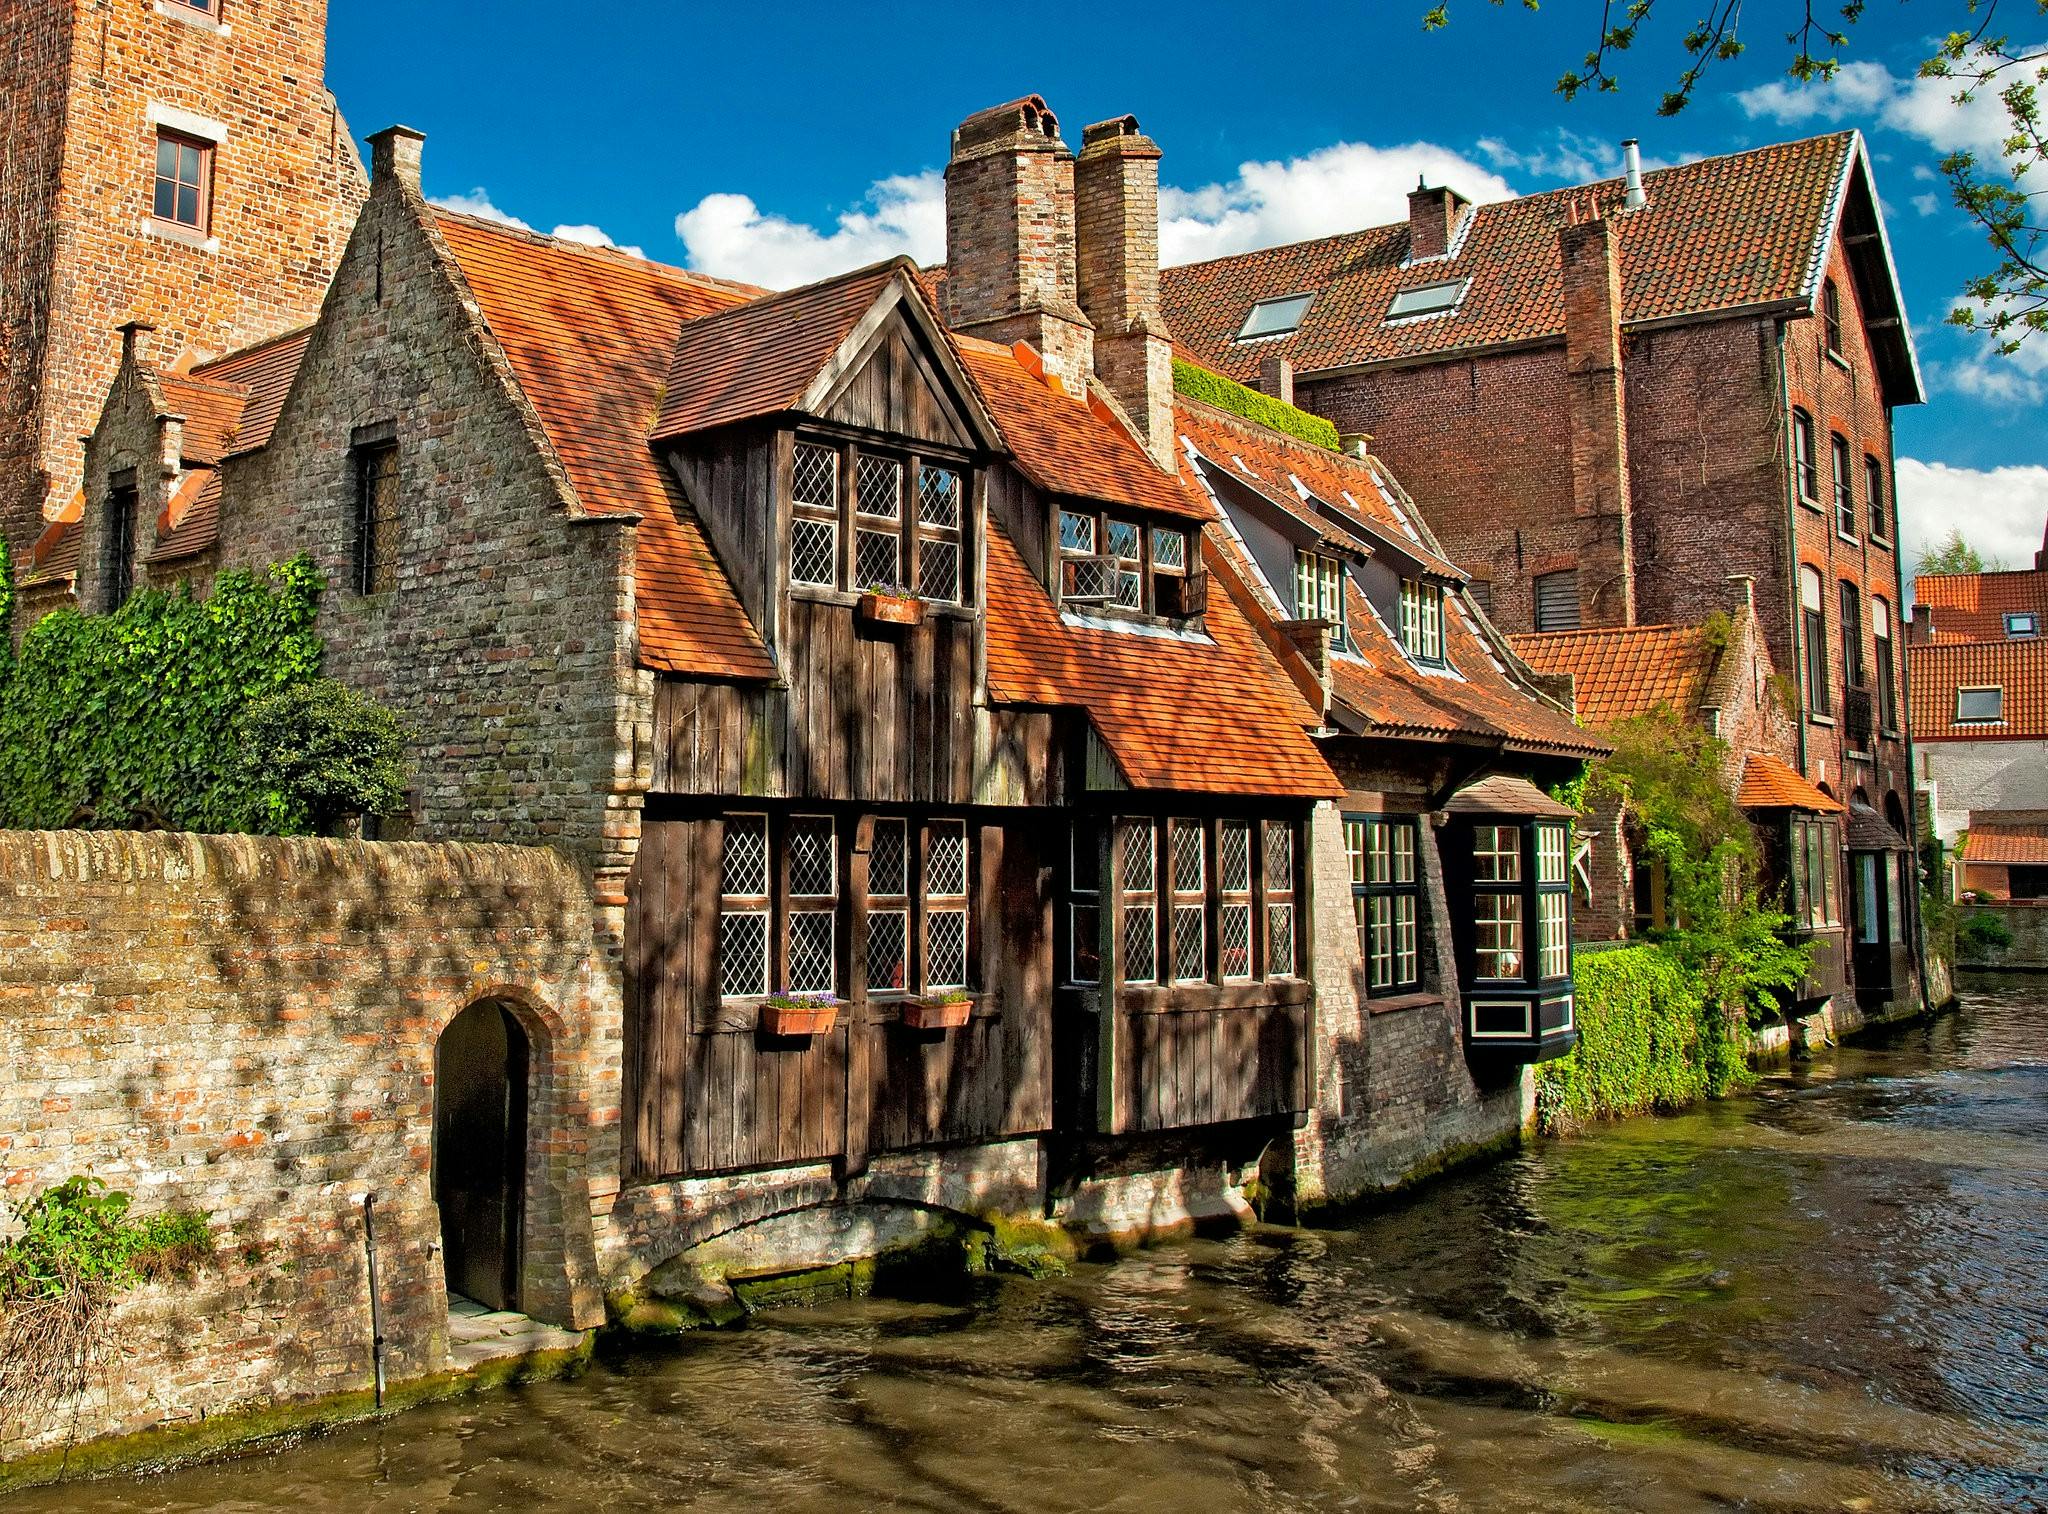 Lindbergh bruges excursion house by canal.jpg